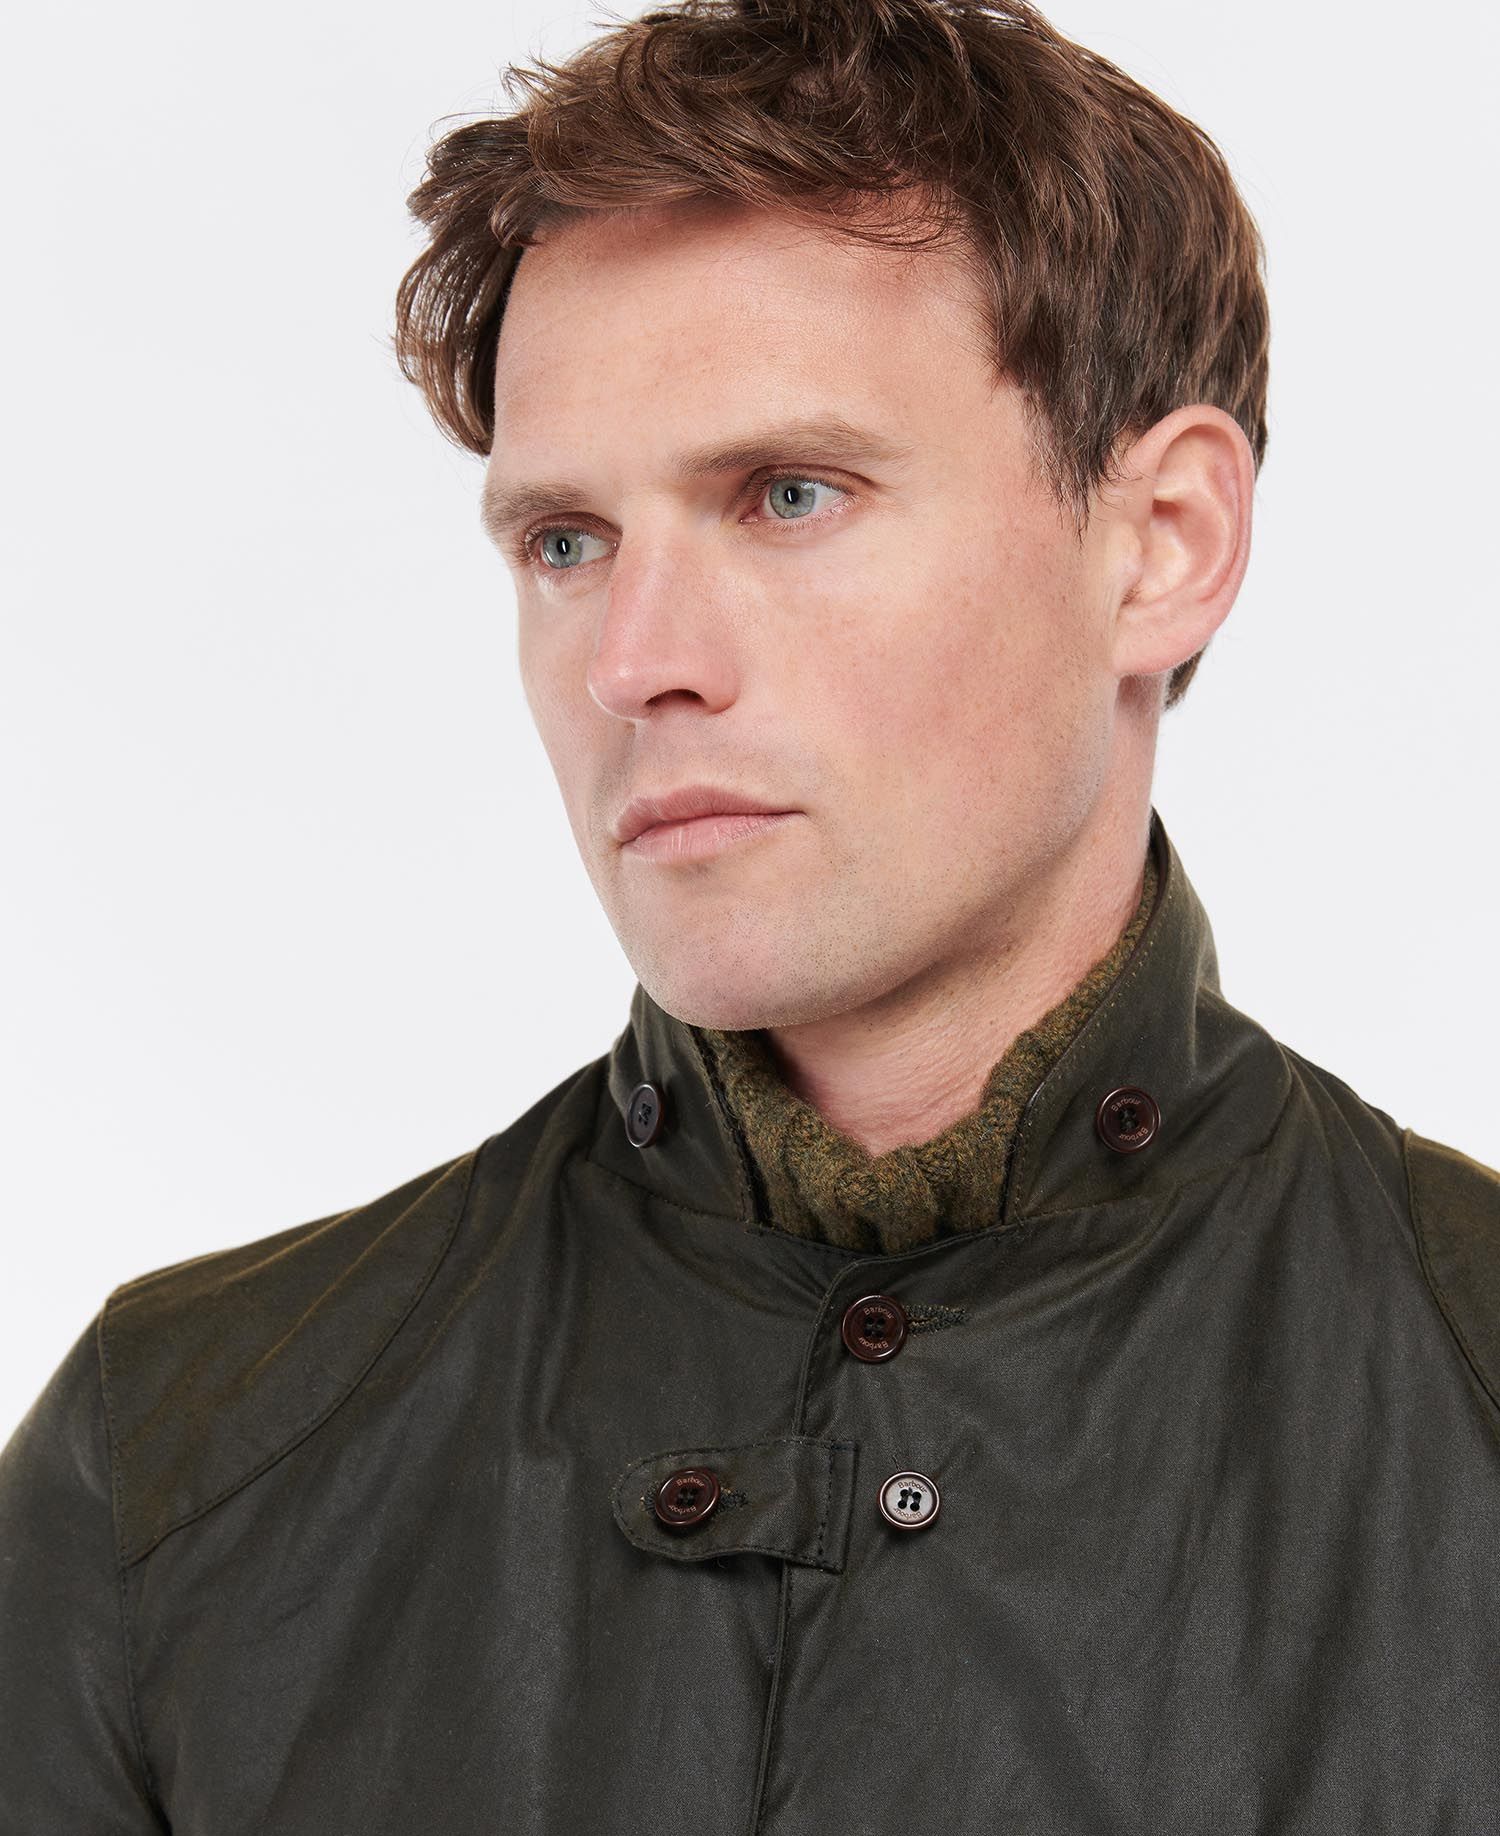 Barbour Beacon Sports Jacket in Olive | Barbour